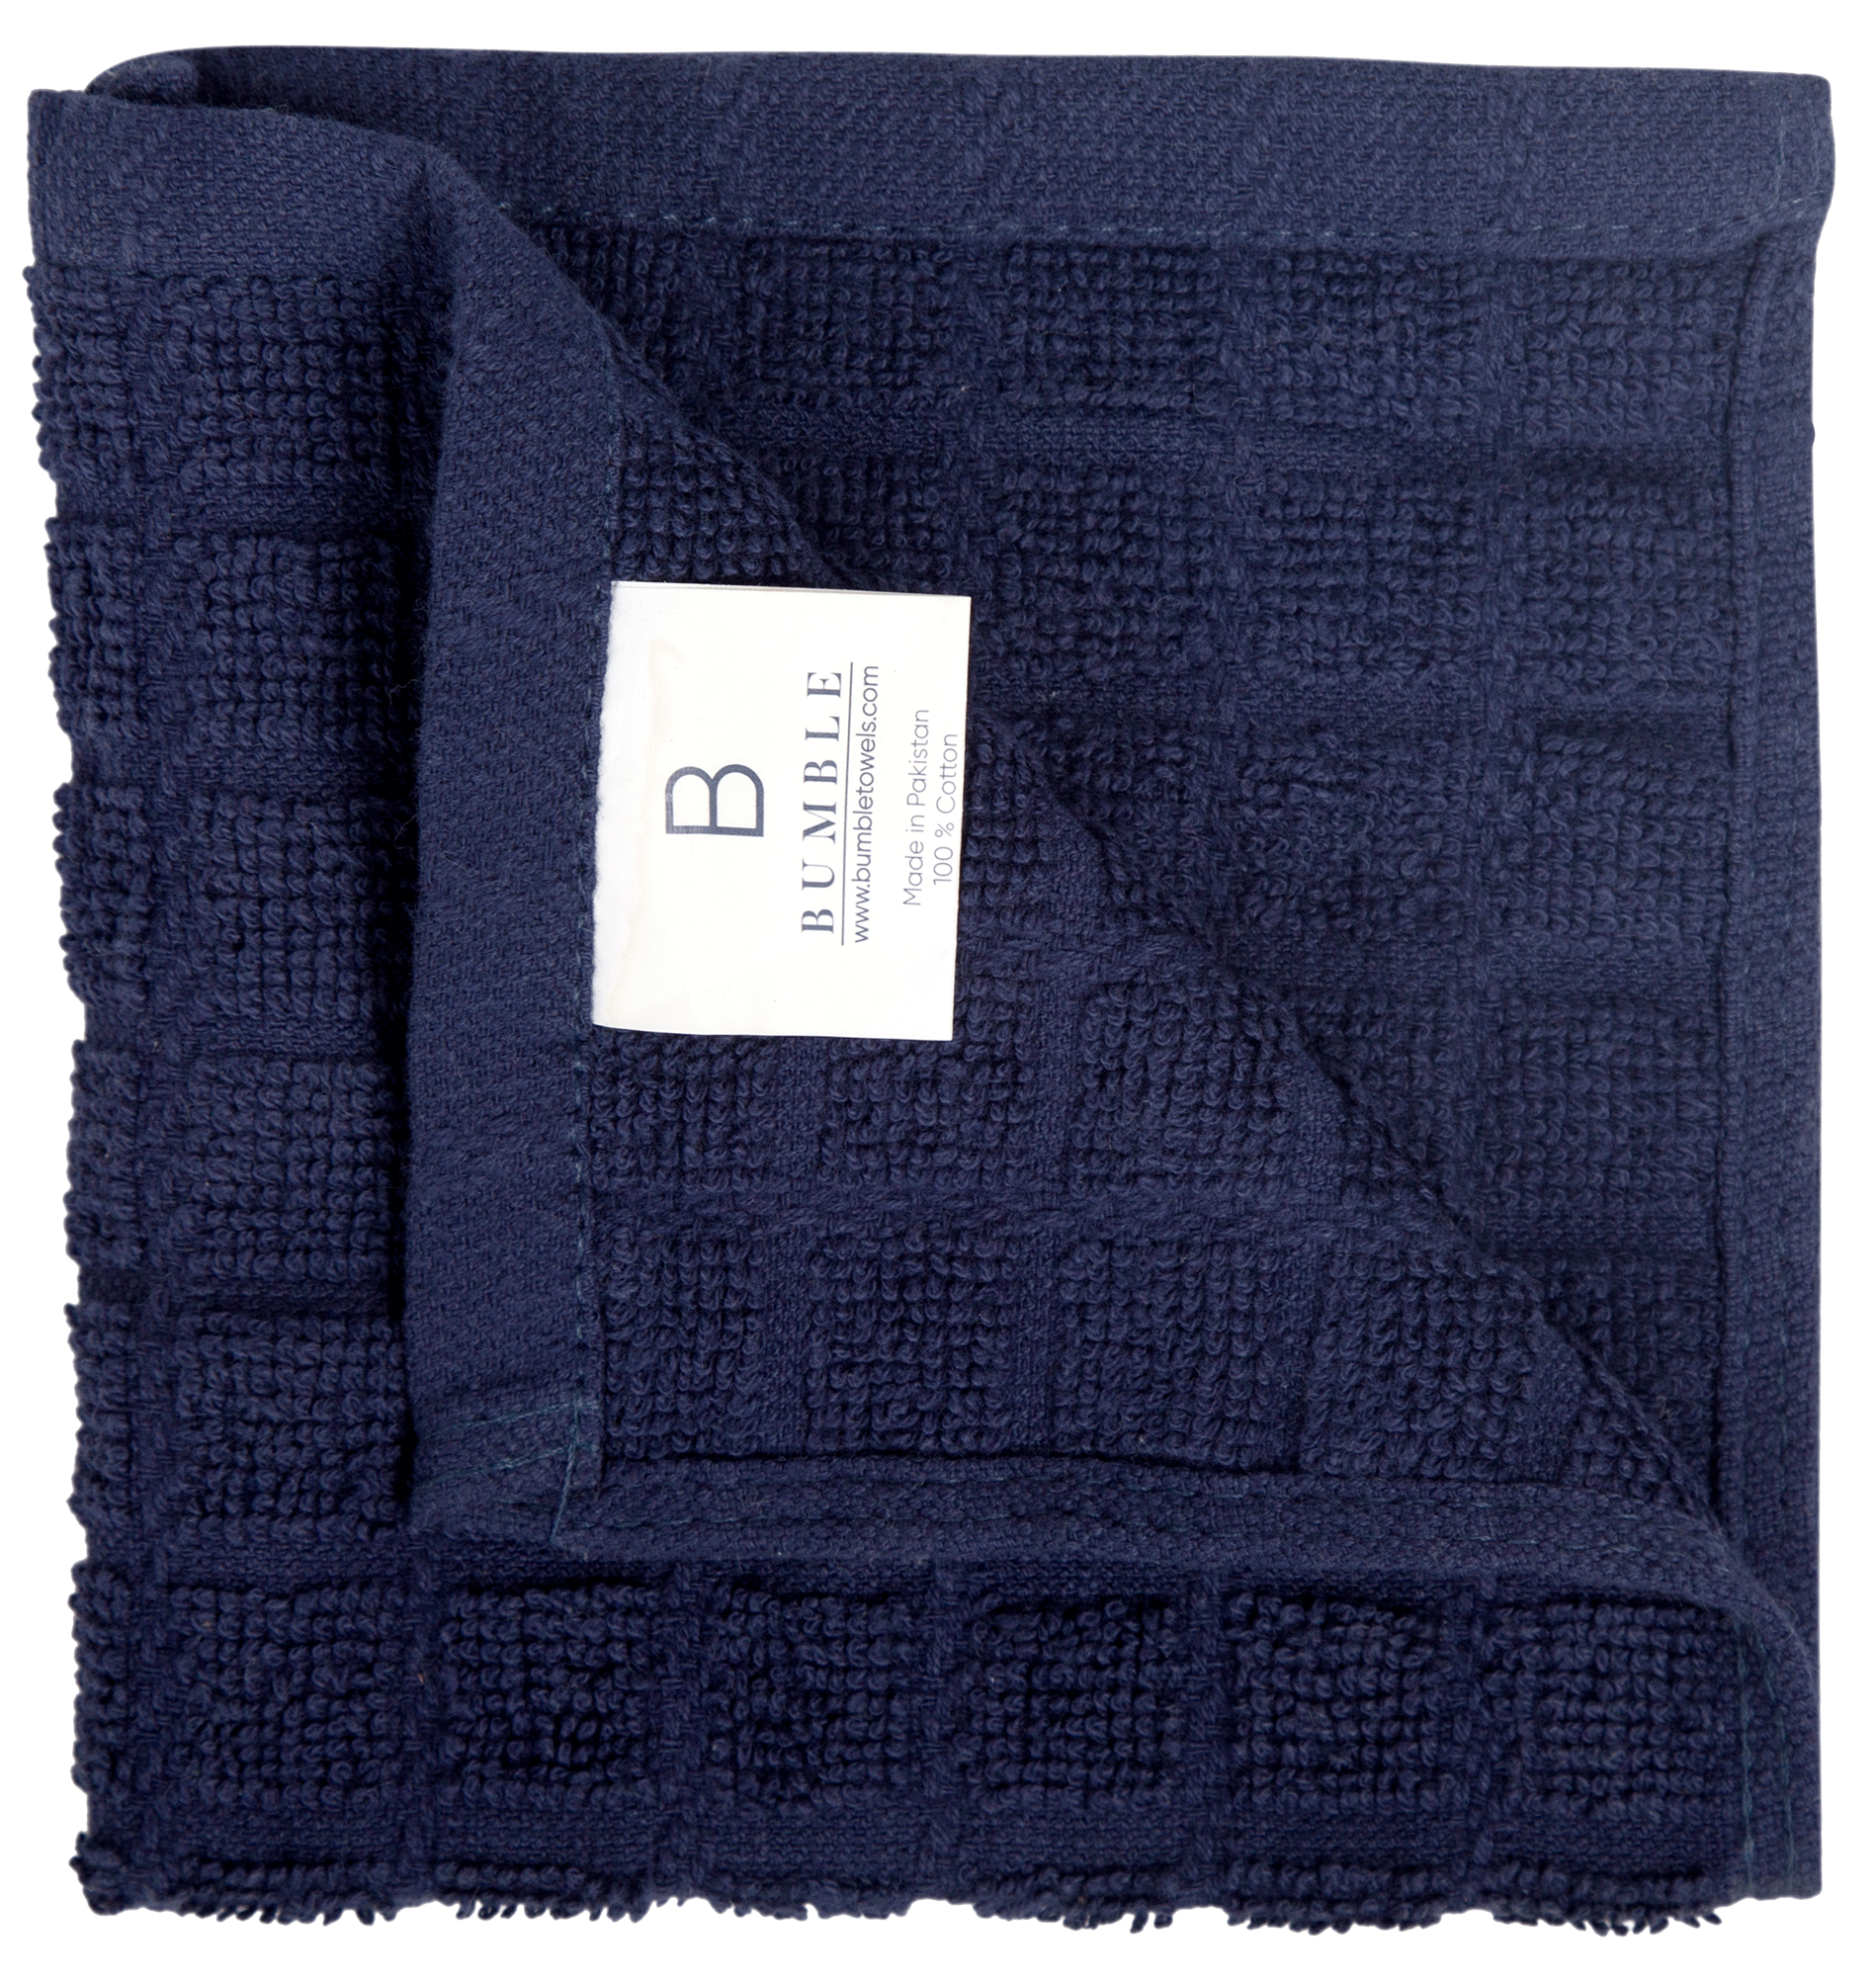 Premium Weave Yarn Dyed Kitchen Towels, Cotton, 16 x 26 in, Five Color Combinations, Buy in Packs of 3 or Buy Bulk Cases, Size: 3 Pack, Black